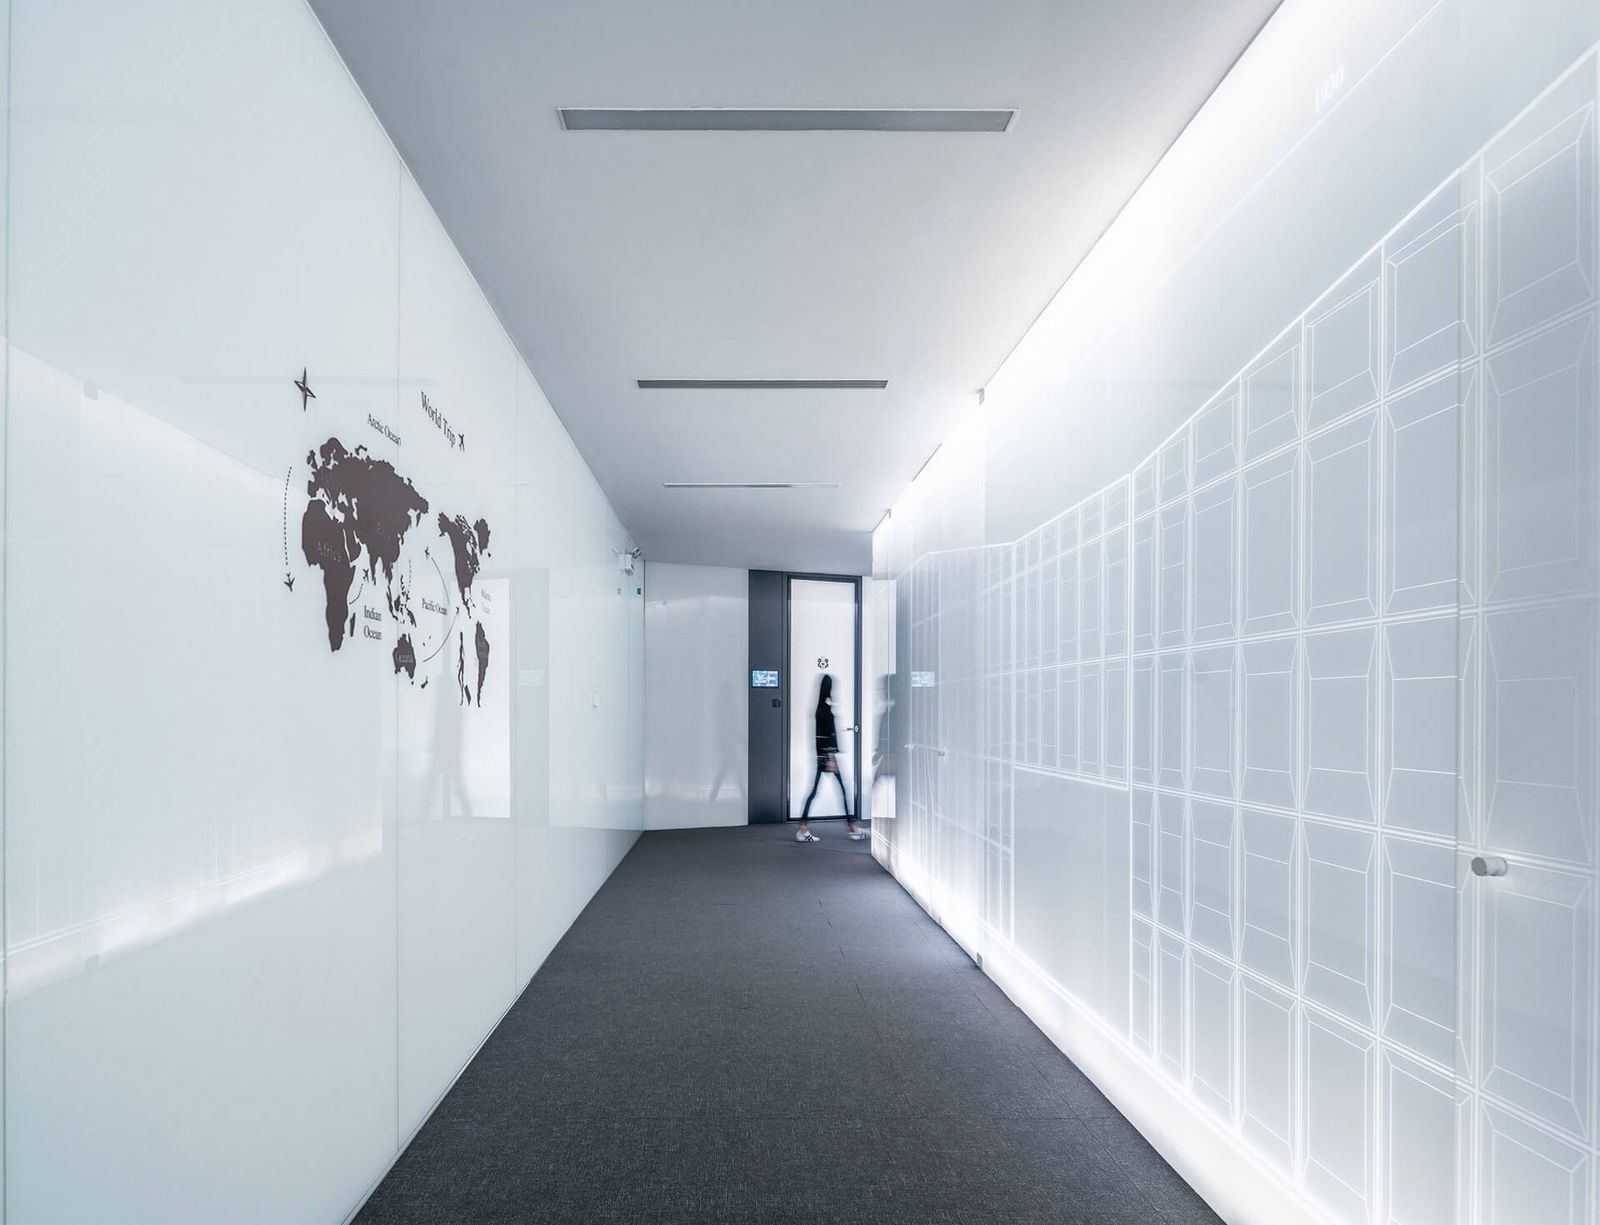 White walled hallway with a world map on the left wall. Woman in background walking around corner traveling to her destination.